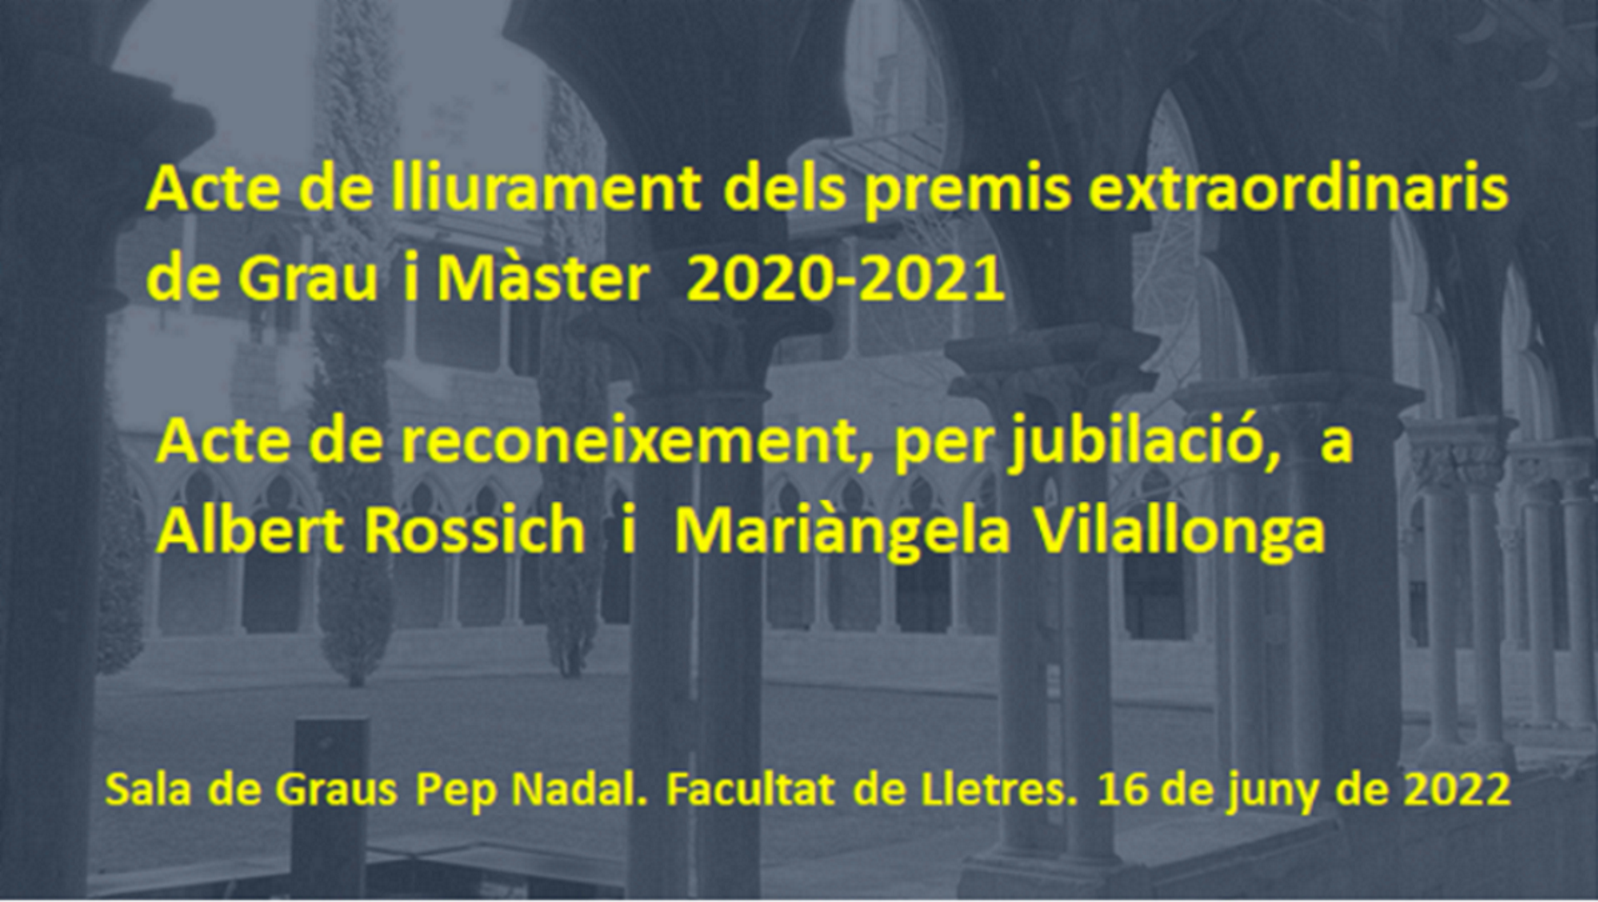 Special Bachelor's- and master’s-degree Awards Ceremony, academic year 2020-2021. Recognition ceremony to celebrate the retirement Albert Rossich and Miràngela Vilallonga